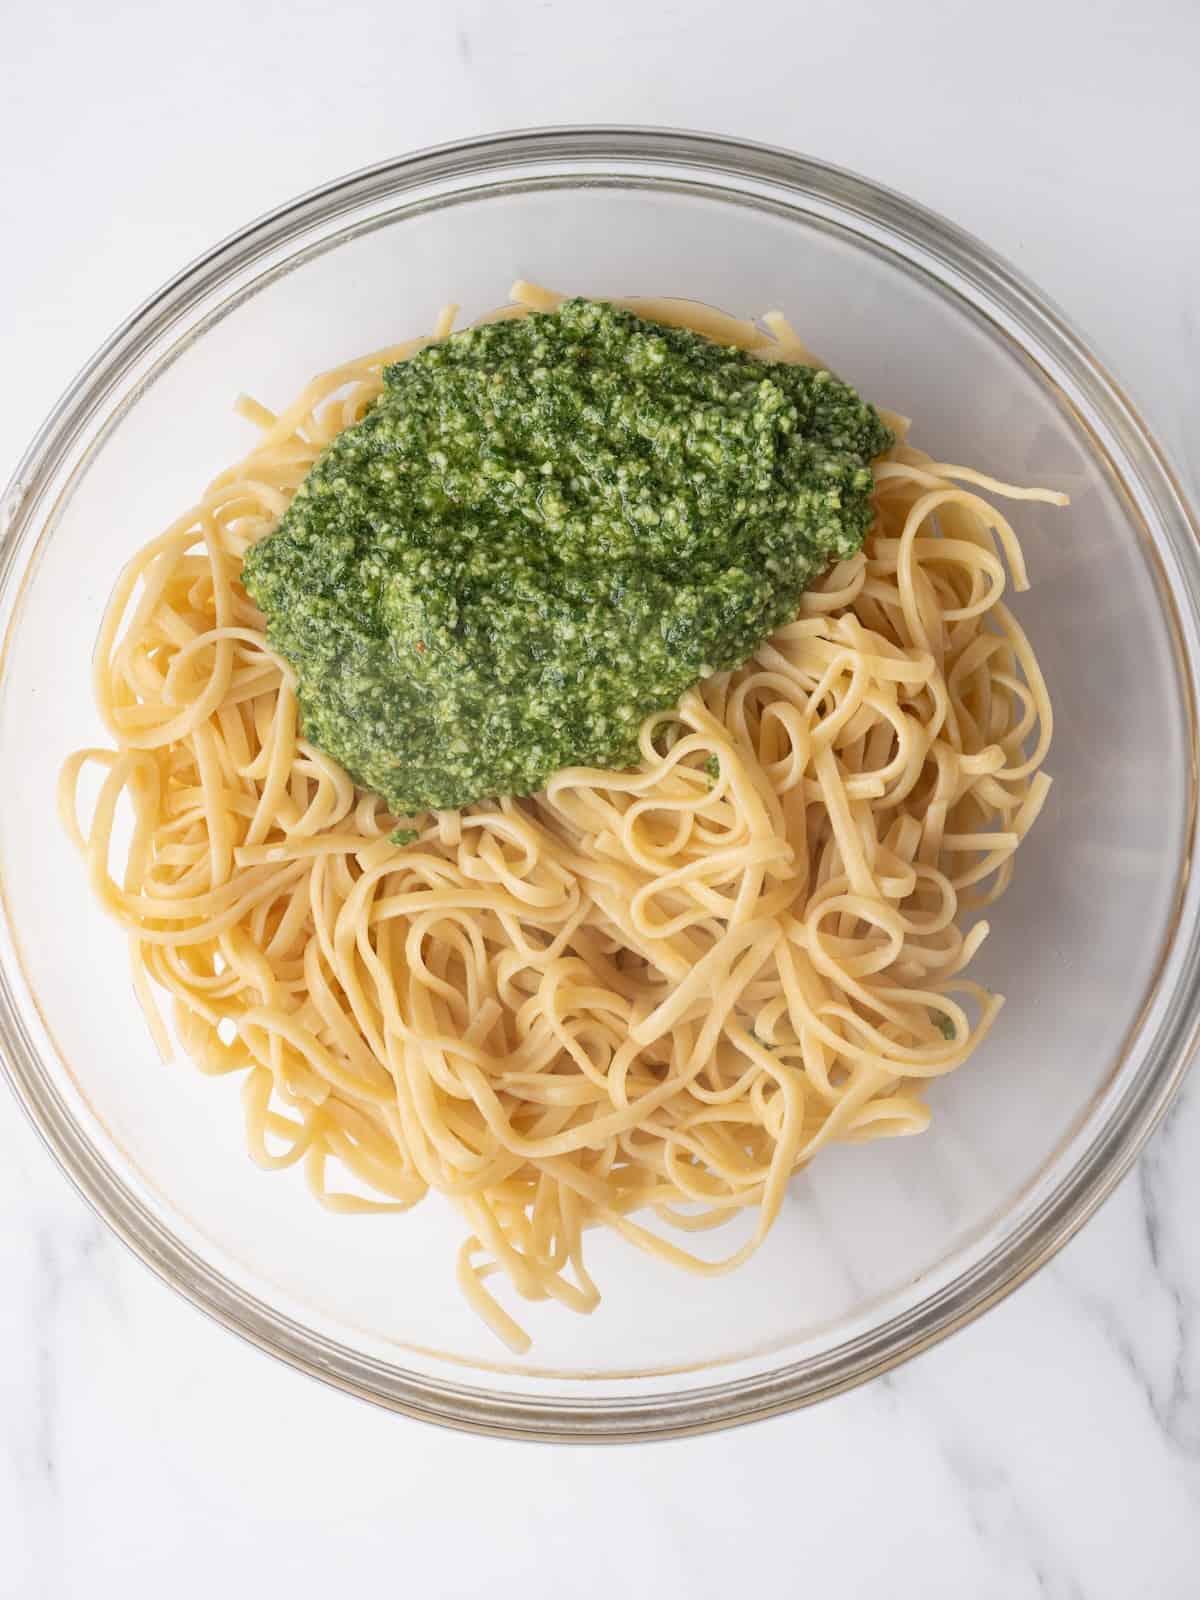 A large glass mixing bowl with cooked linguine and arugula pesto.